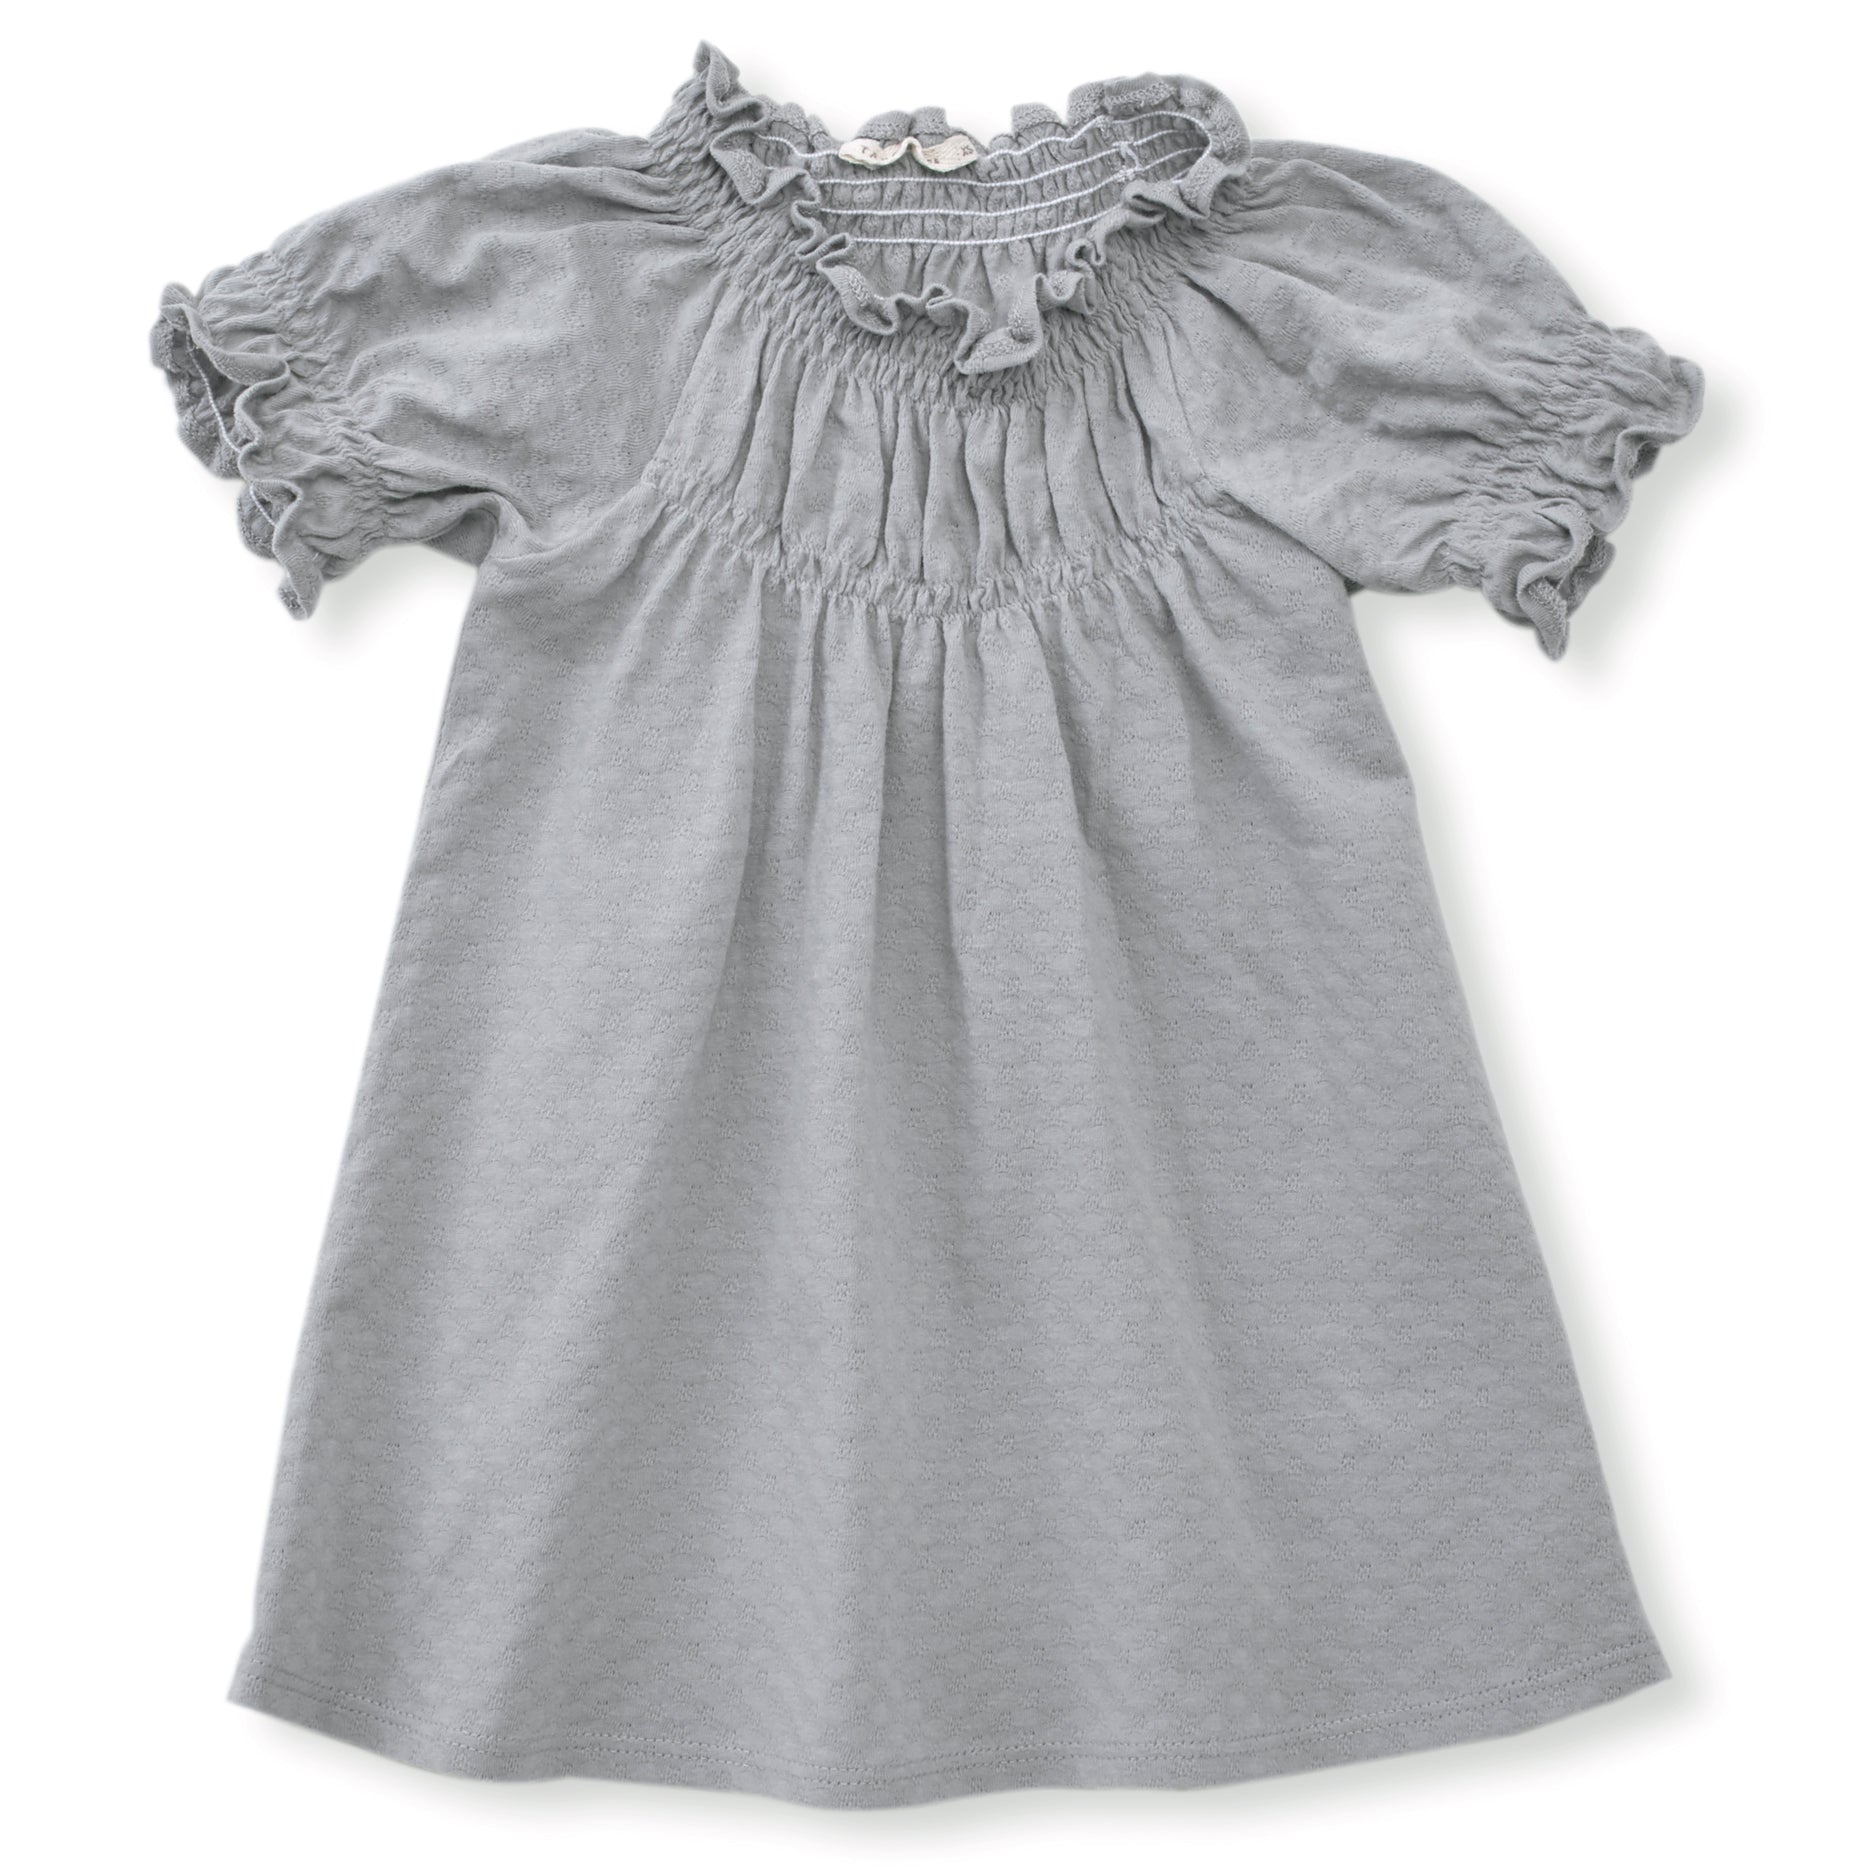 cool grey pointelle short sleeved dress with soft elastic gathering at neckline and cuffs. 100% organic cotton pointelle knit.